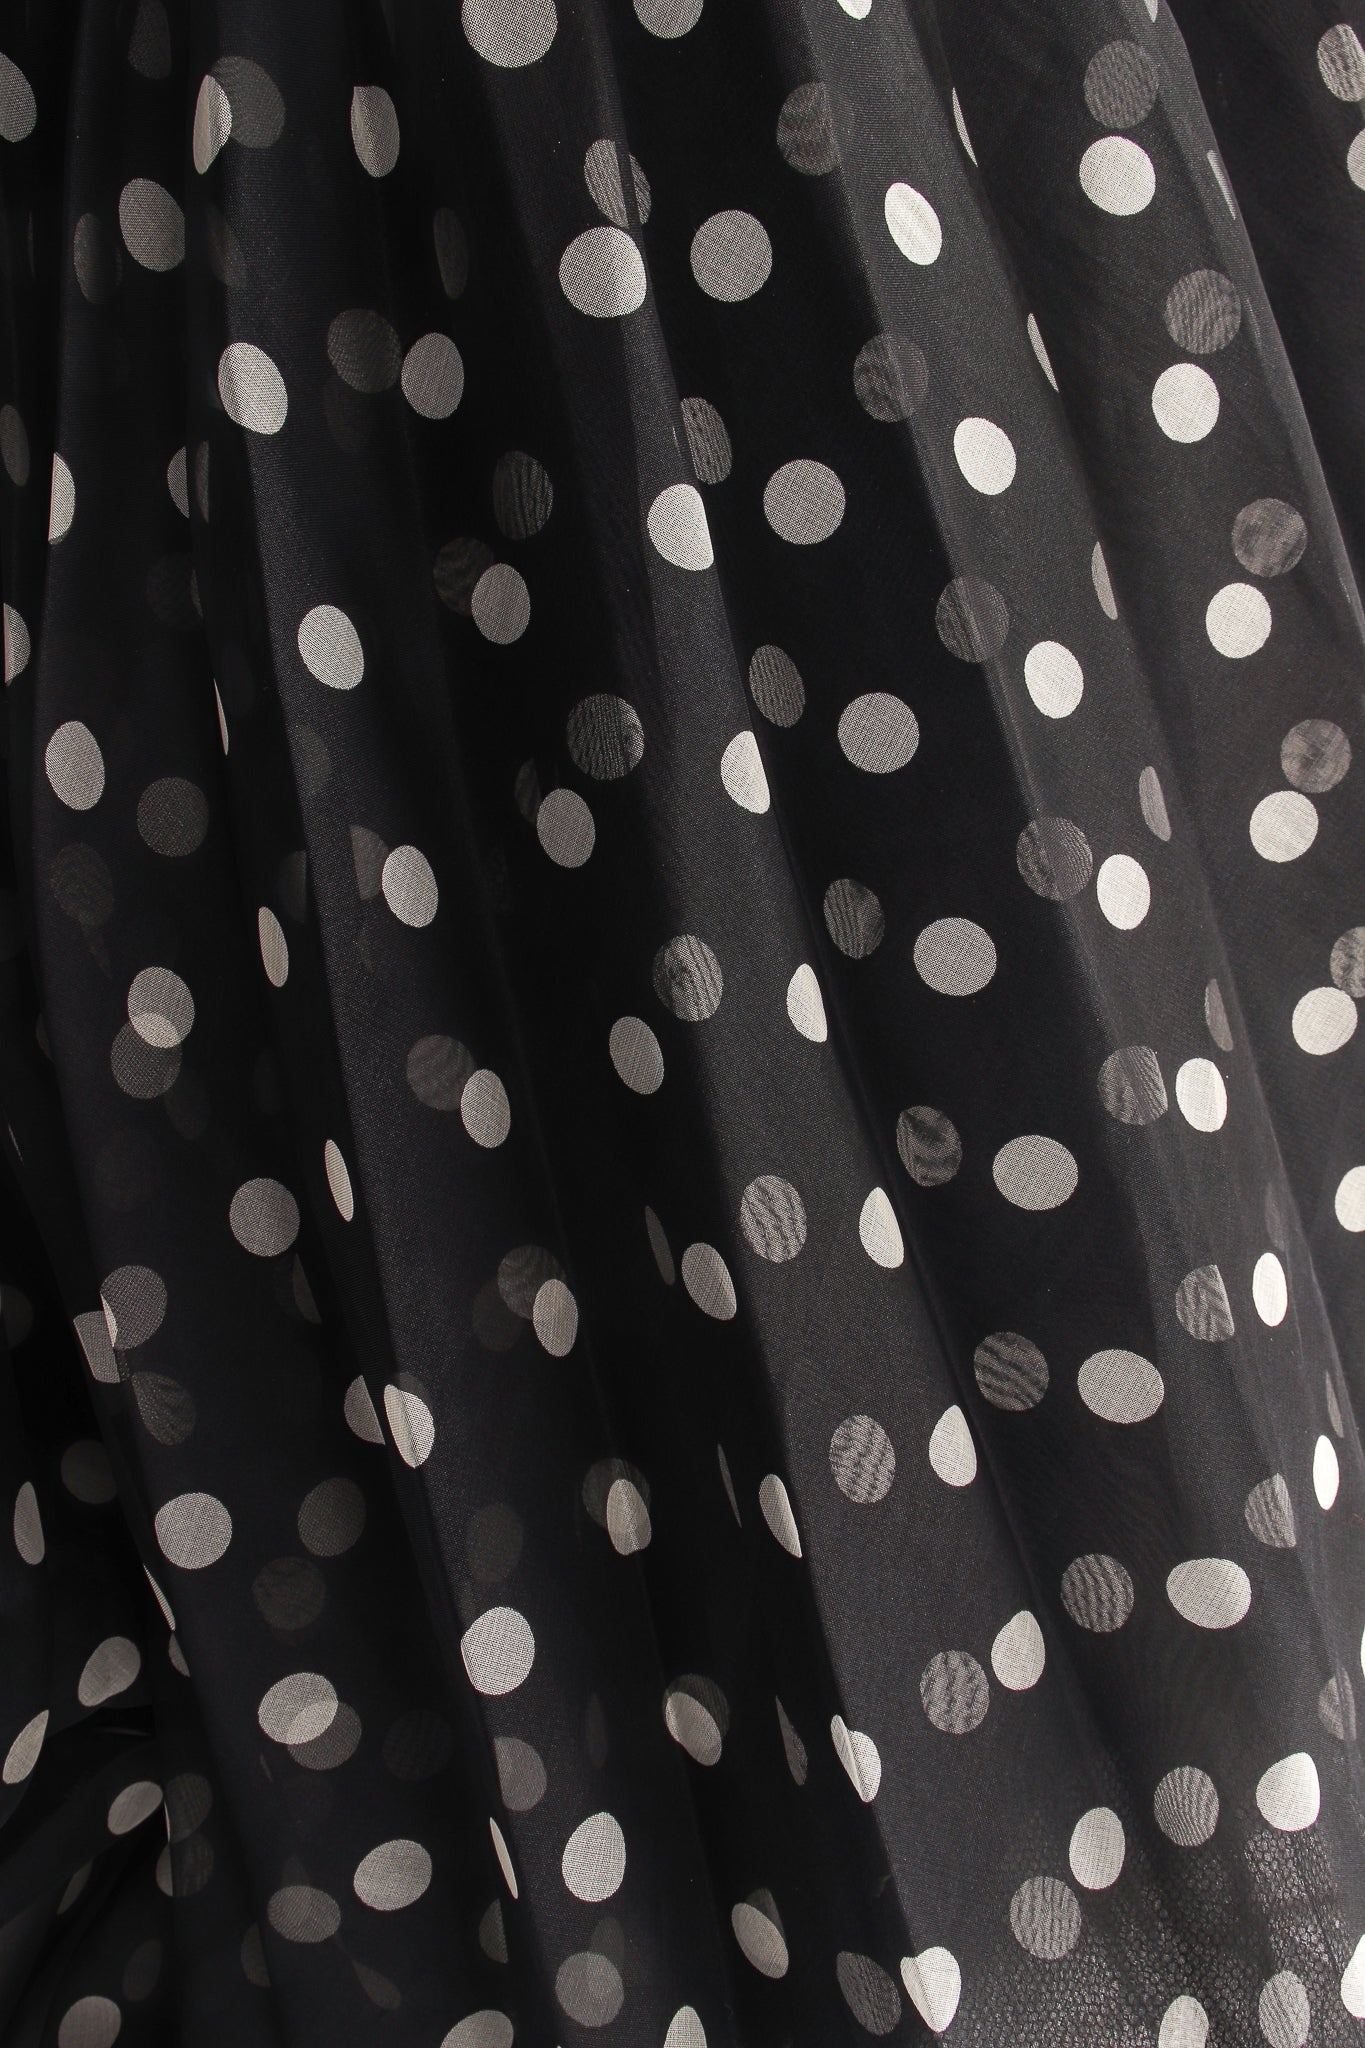 Vintage Christian Dior by Gianfranco Ferre Layered Organza Dot Skirt fabric detail @ Recess LA